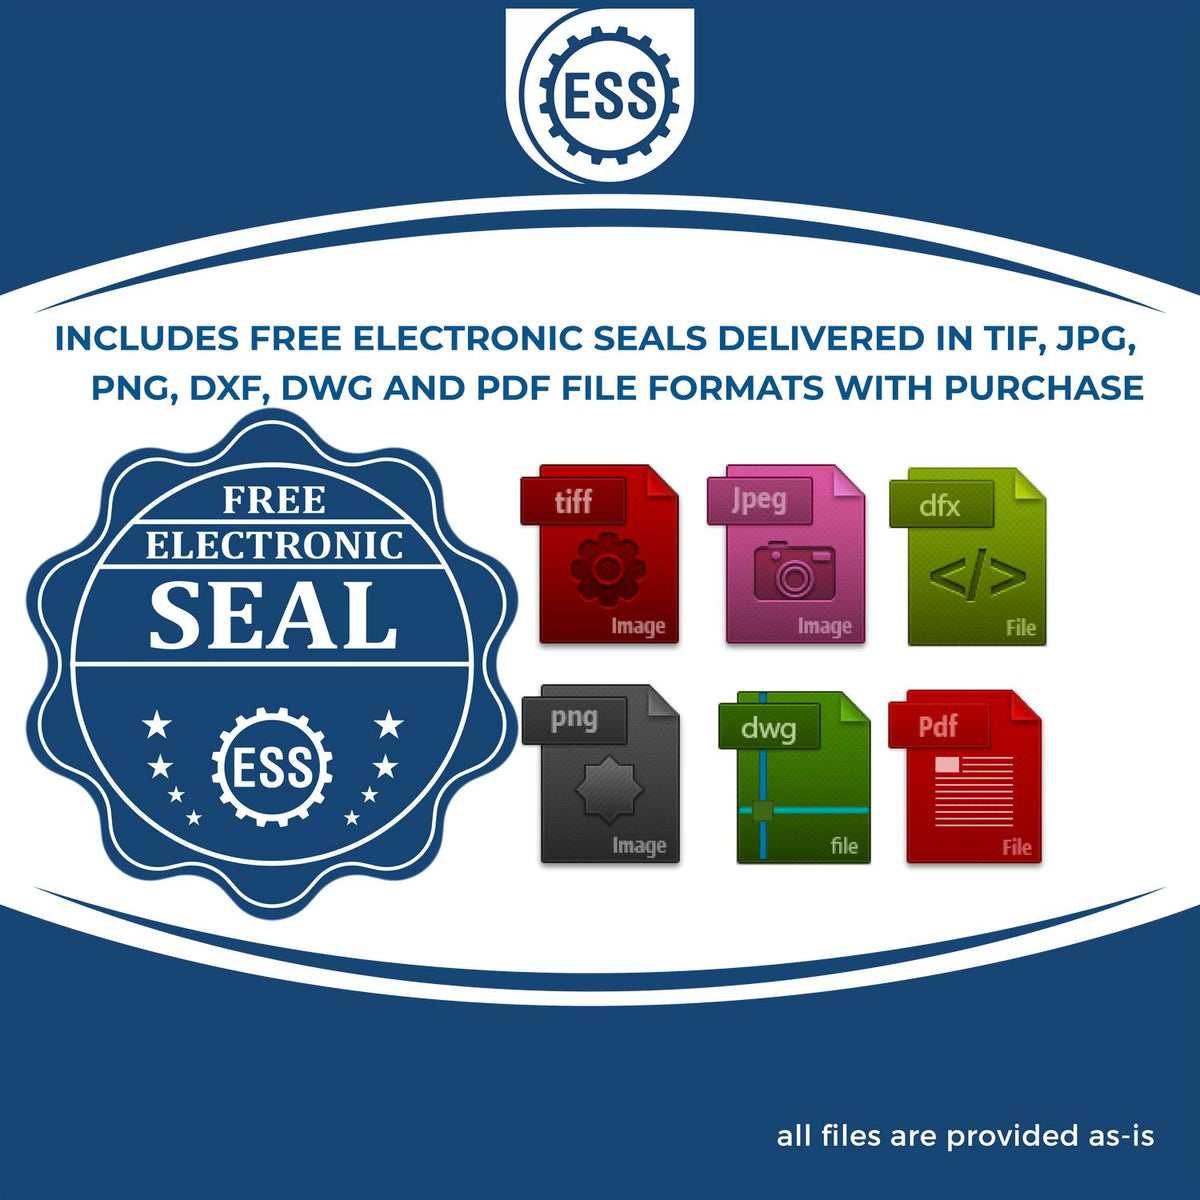 An infographic for the free electronic seal for the Soft North Carolina Professional Engineer Seal illustrating the different file type icons such as DXF, DWG, TIF, JPG and PNG.